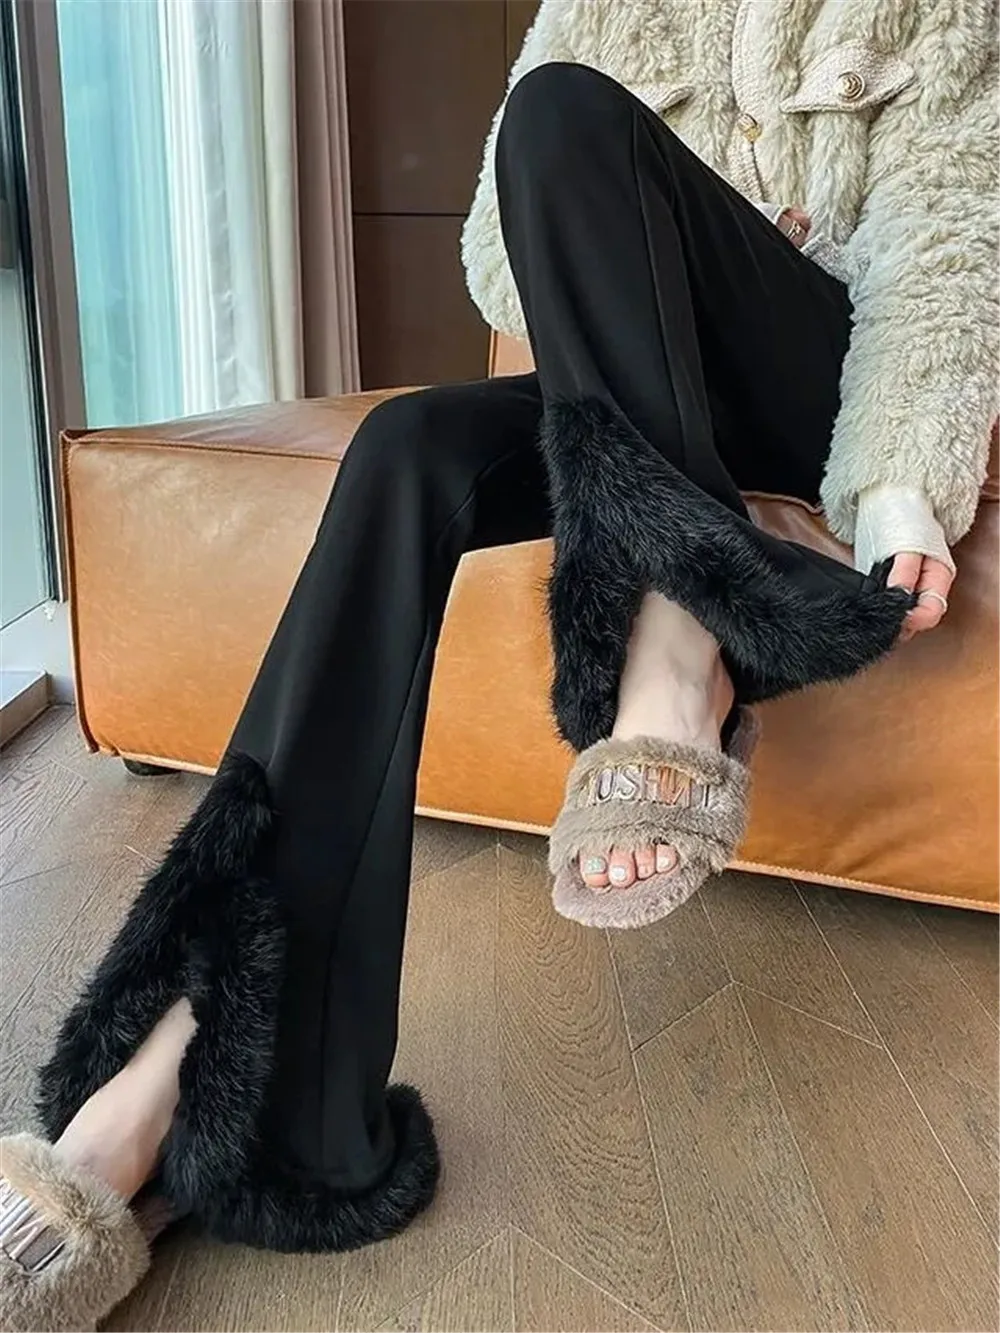 Formal DressesWoman ClothingSlit Micro Dress Women'S Pants Autumn And Winter New Fashion Black Velvet Casual Narrow Ve 1pcs extremely narrow stainless steel l shaped handles black shower room glass door handles bathroom glass door pull fg880